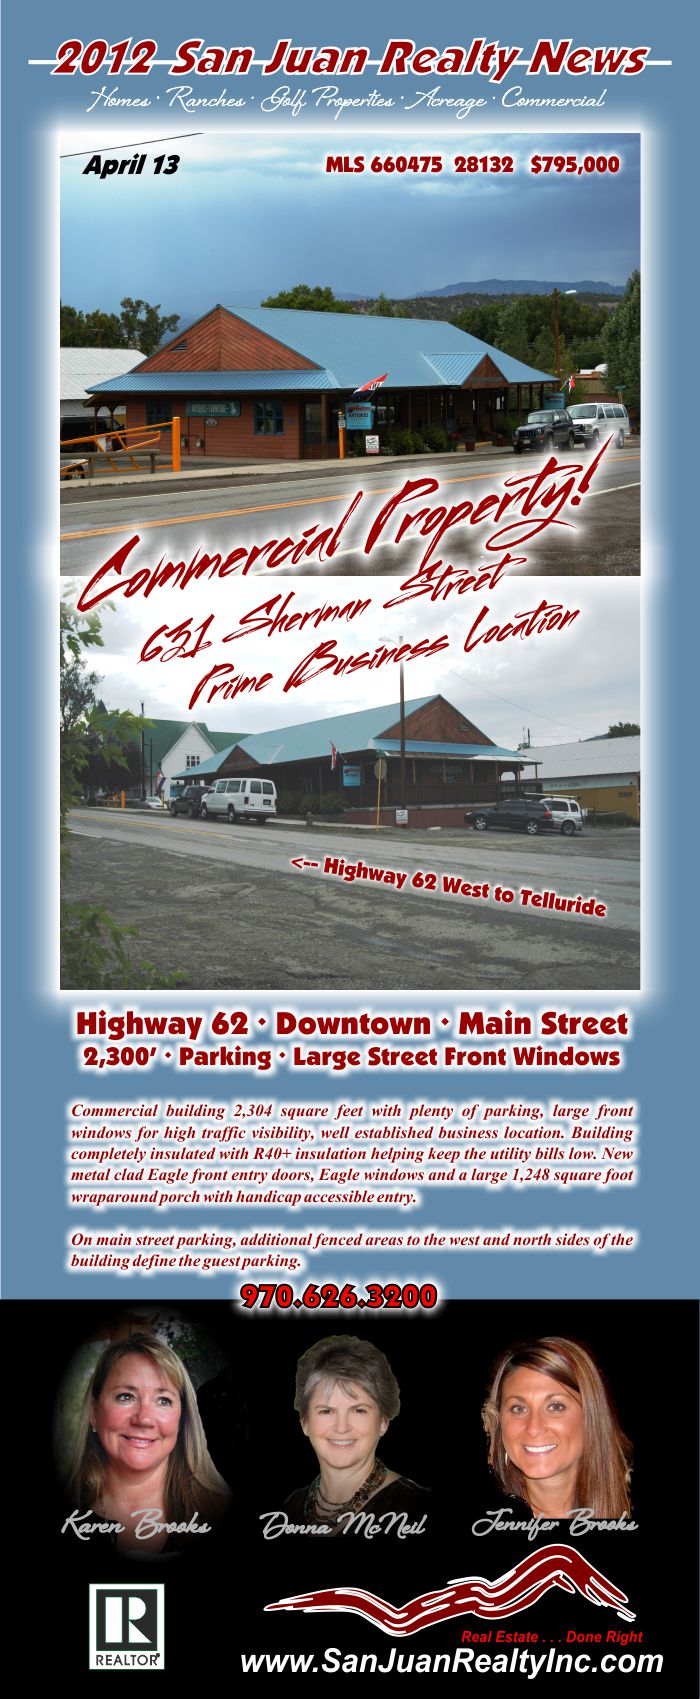 631 Sherman Street Downtown Commercial Ridgway Colorado for sale